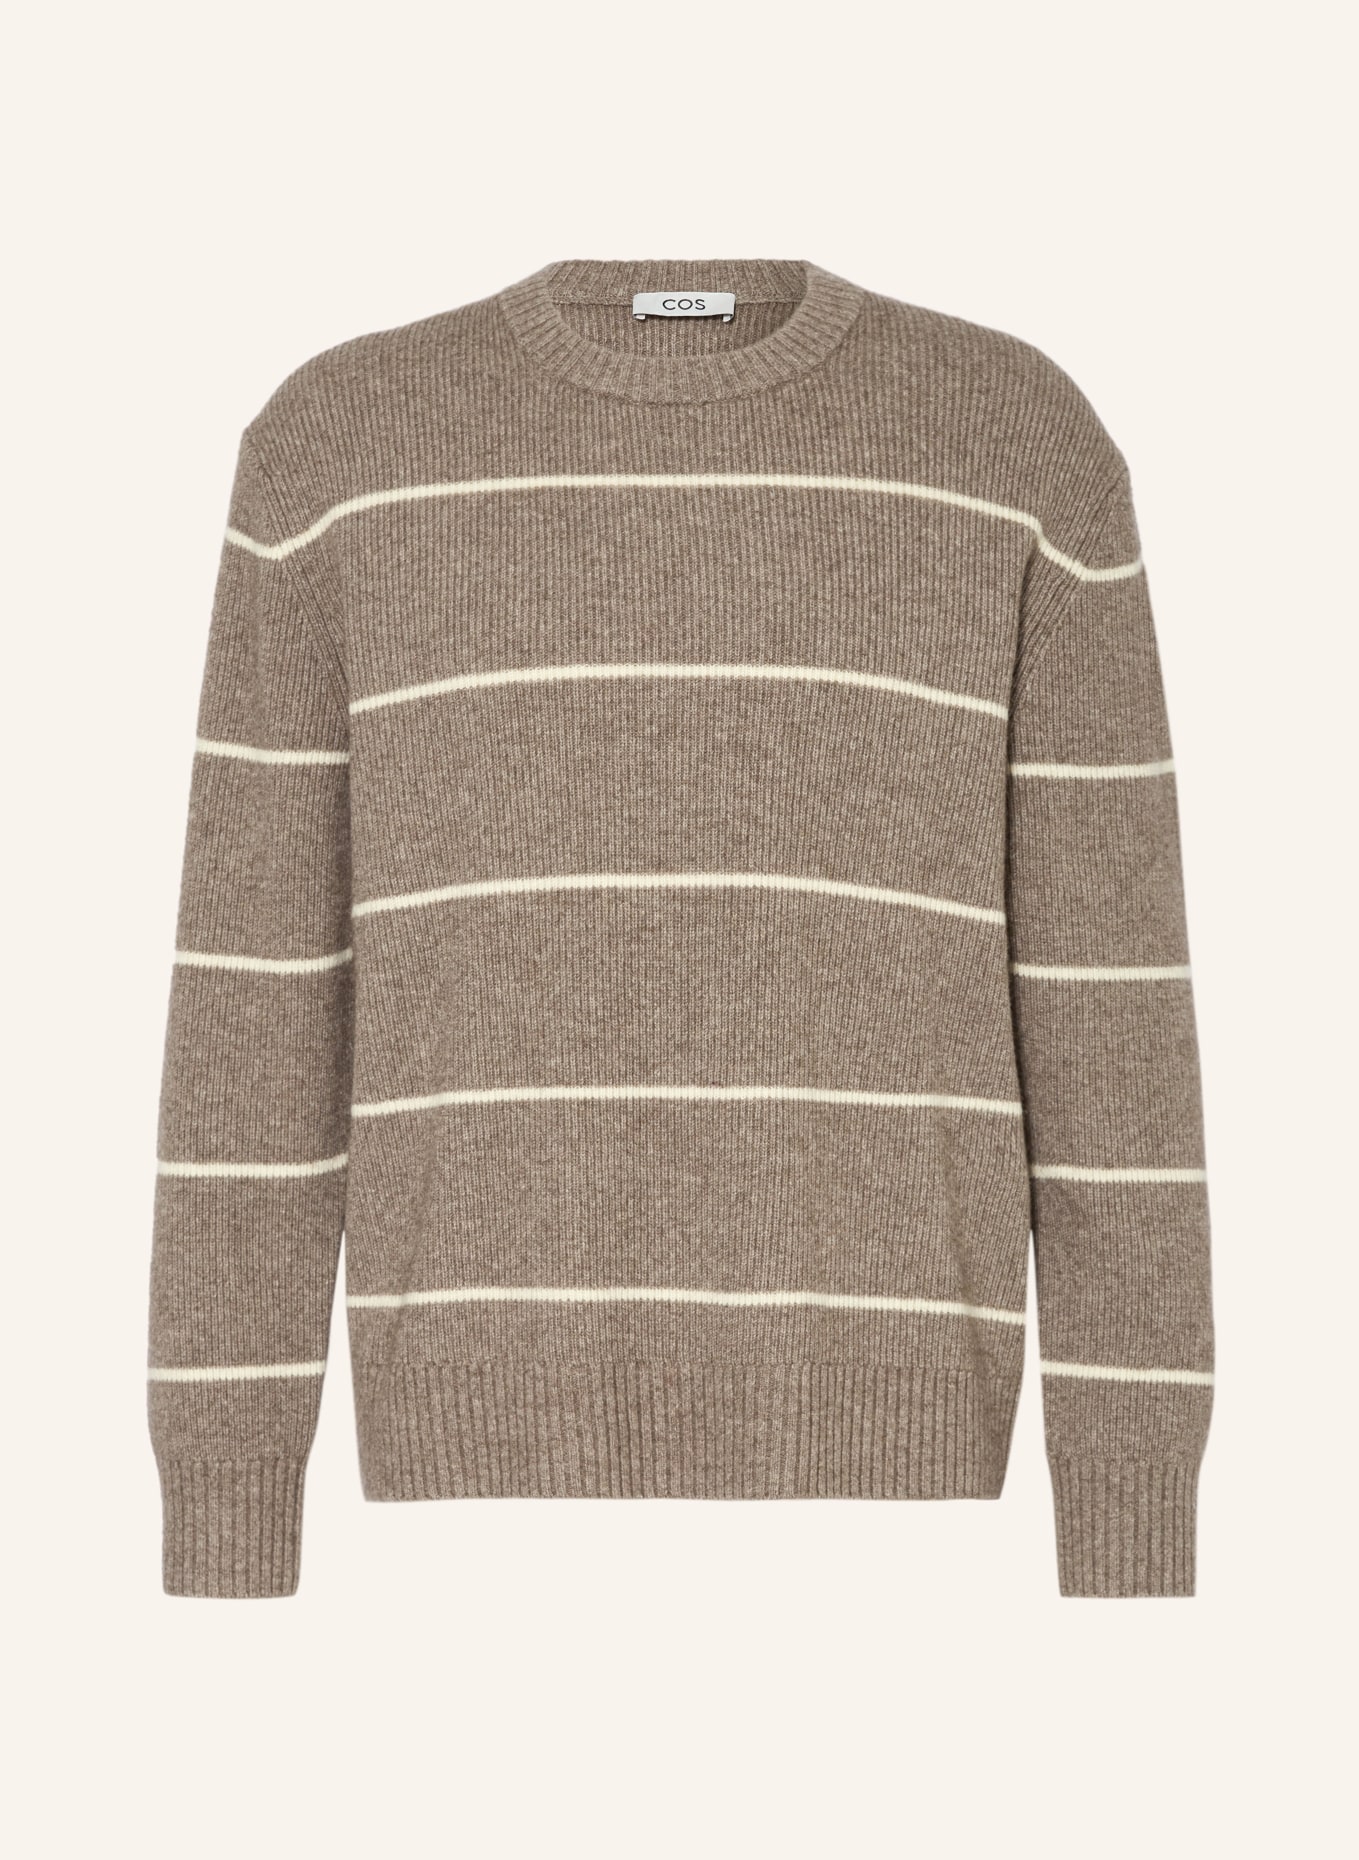 COS Sweater, Color: BROWN/ CREAM (Image 1)